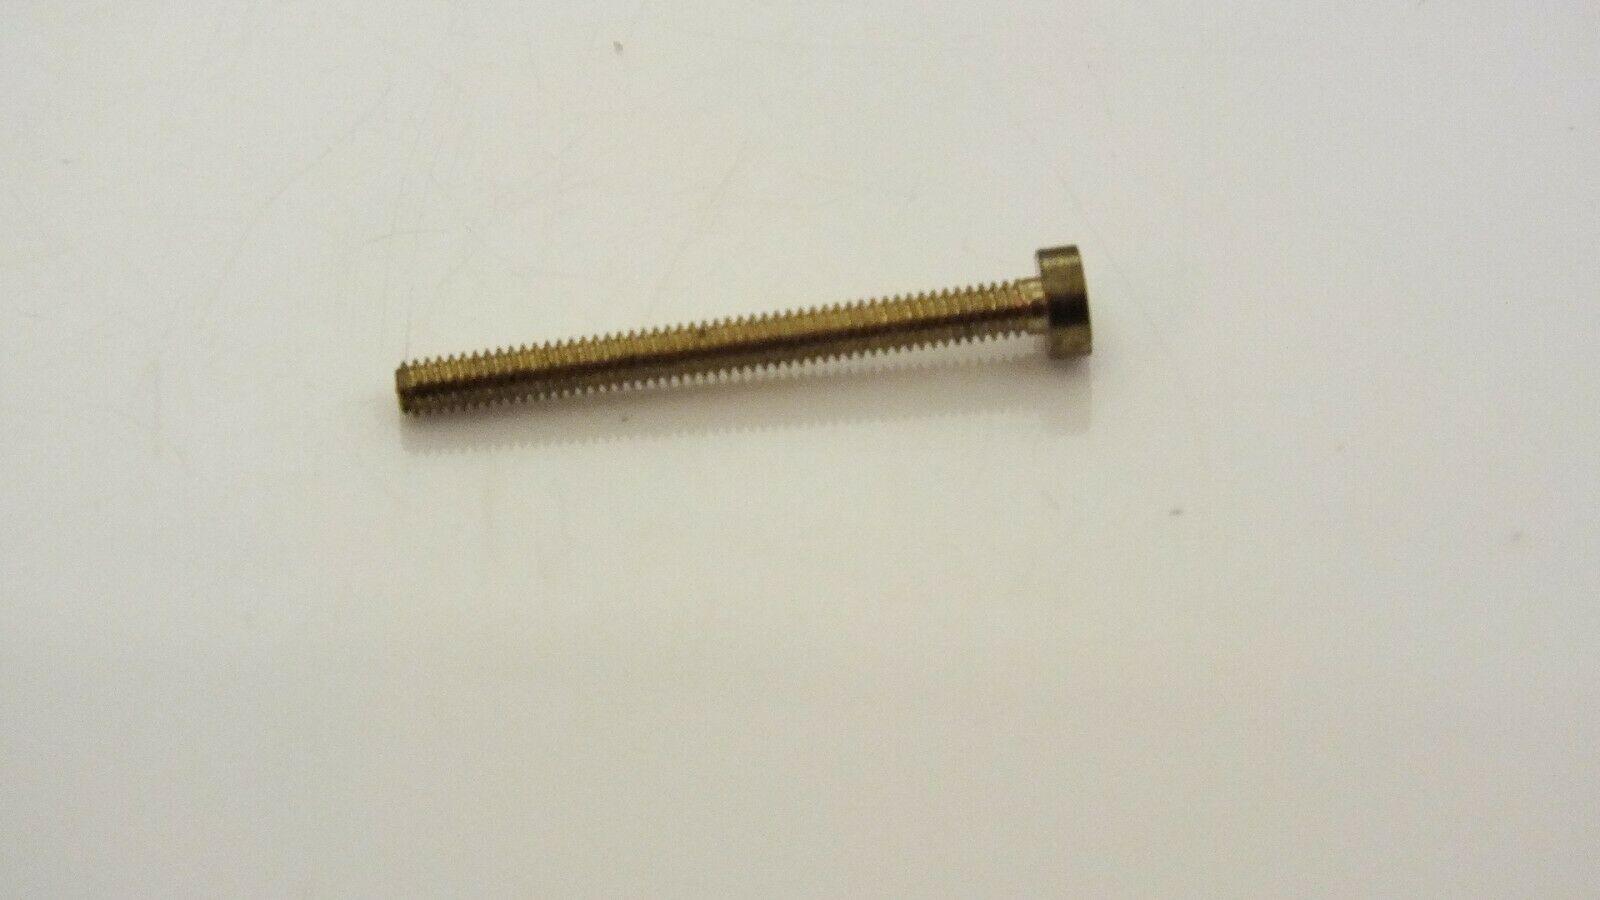 S1055 # hornby triang spare magnet fixing screw CO-CO BO-BO CL37+ MORE      G3B